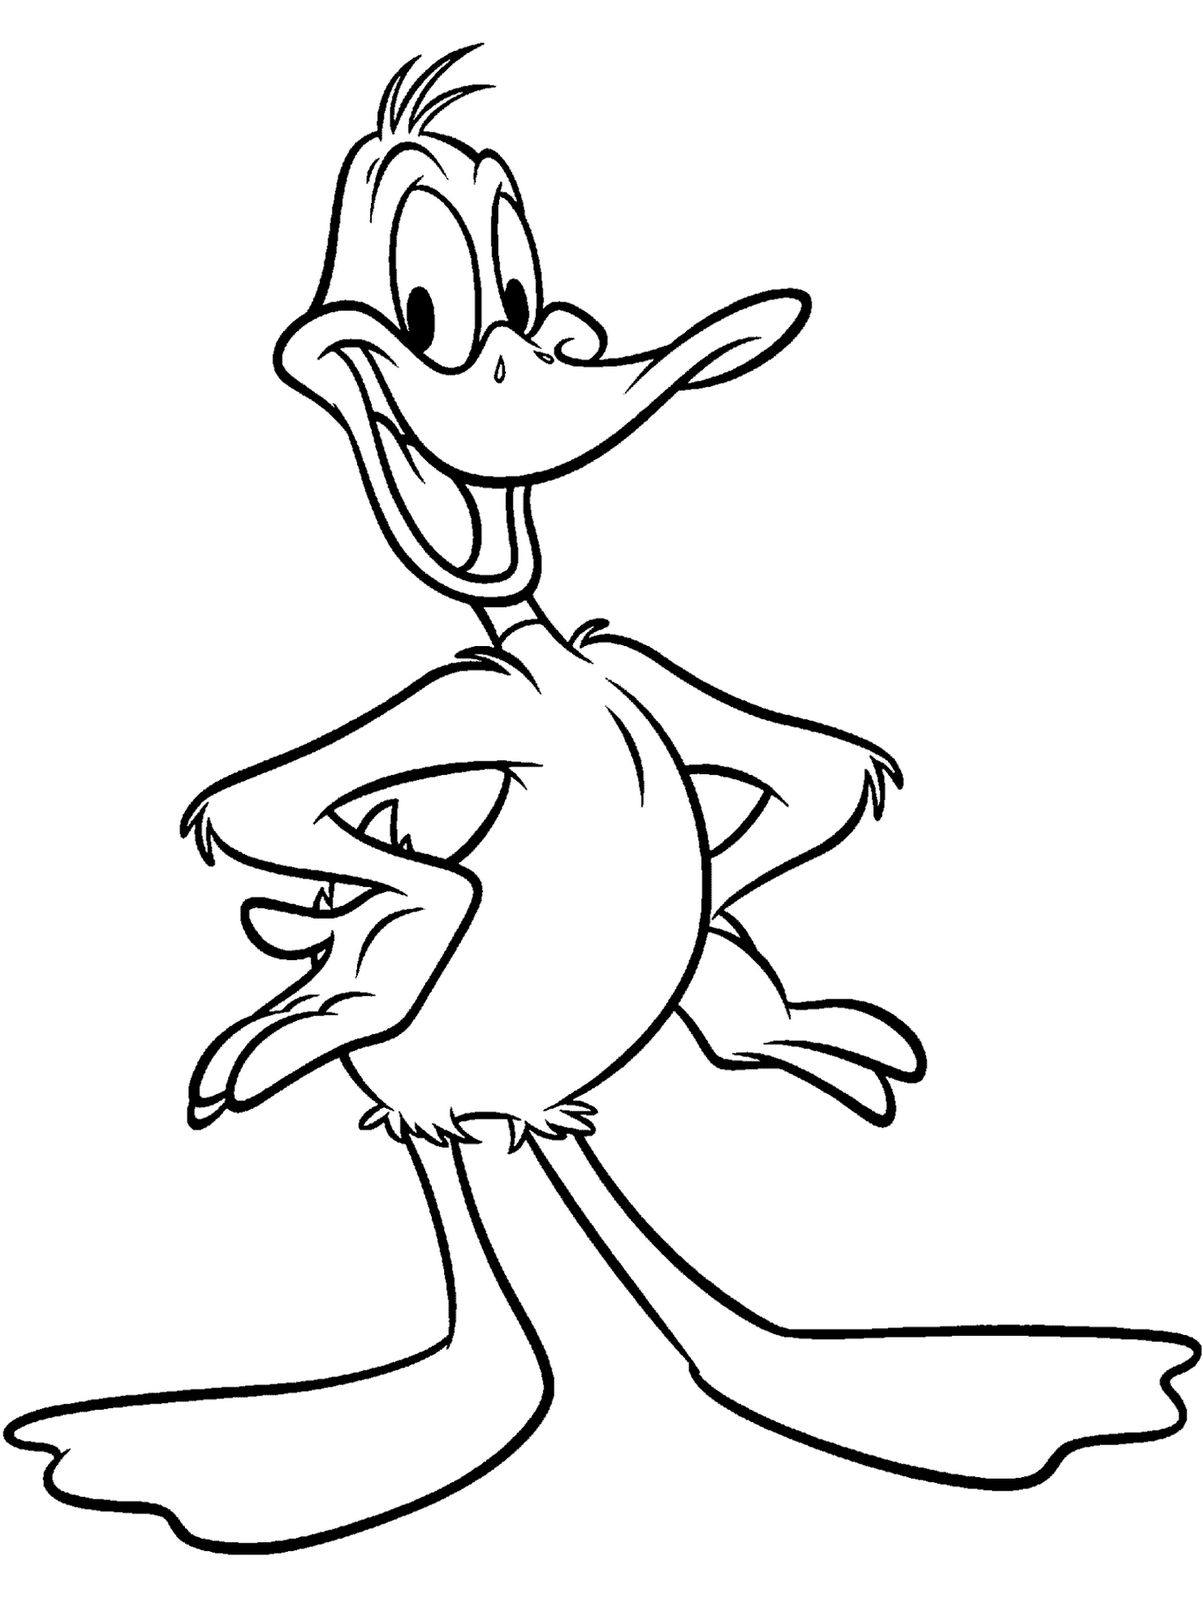 Daffy duck coloring pictures ~ Coloring